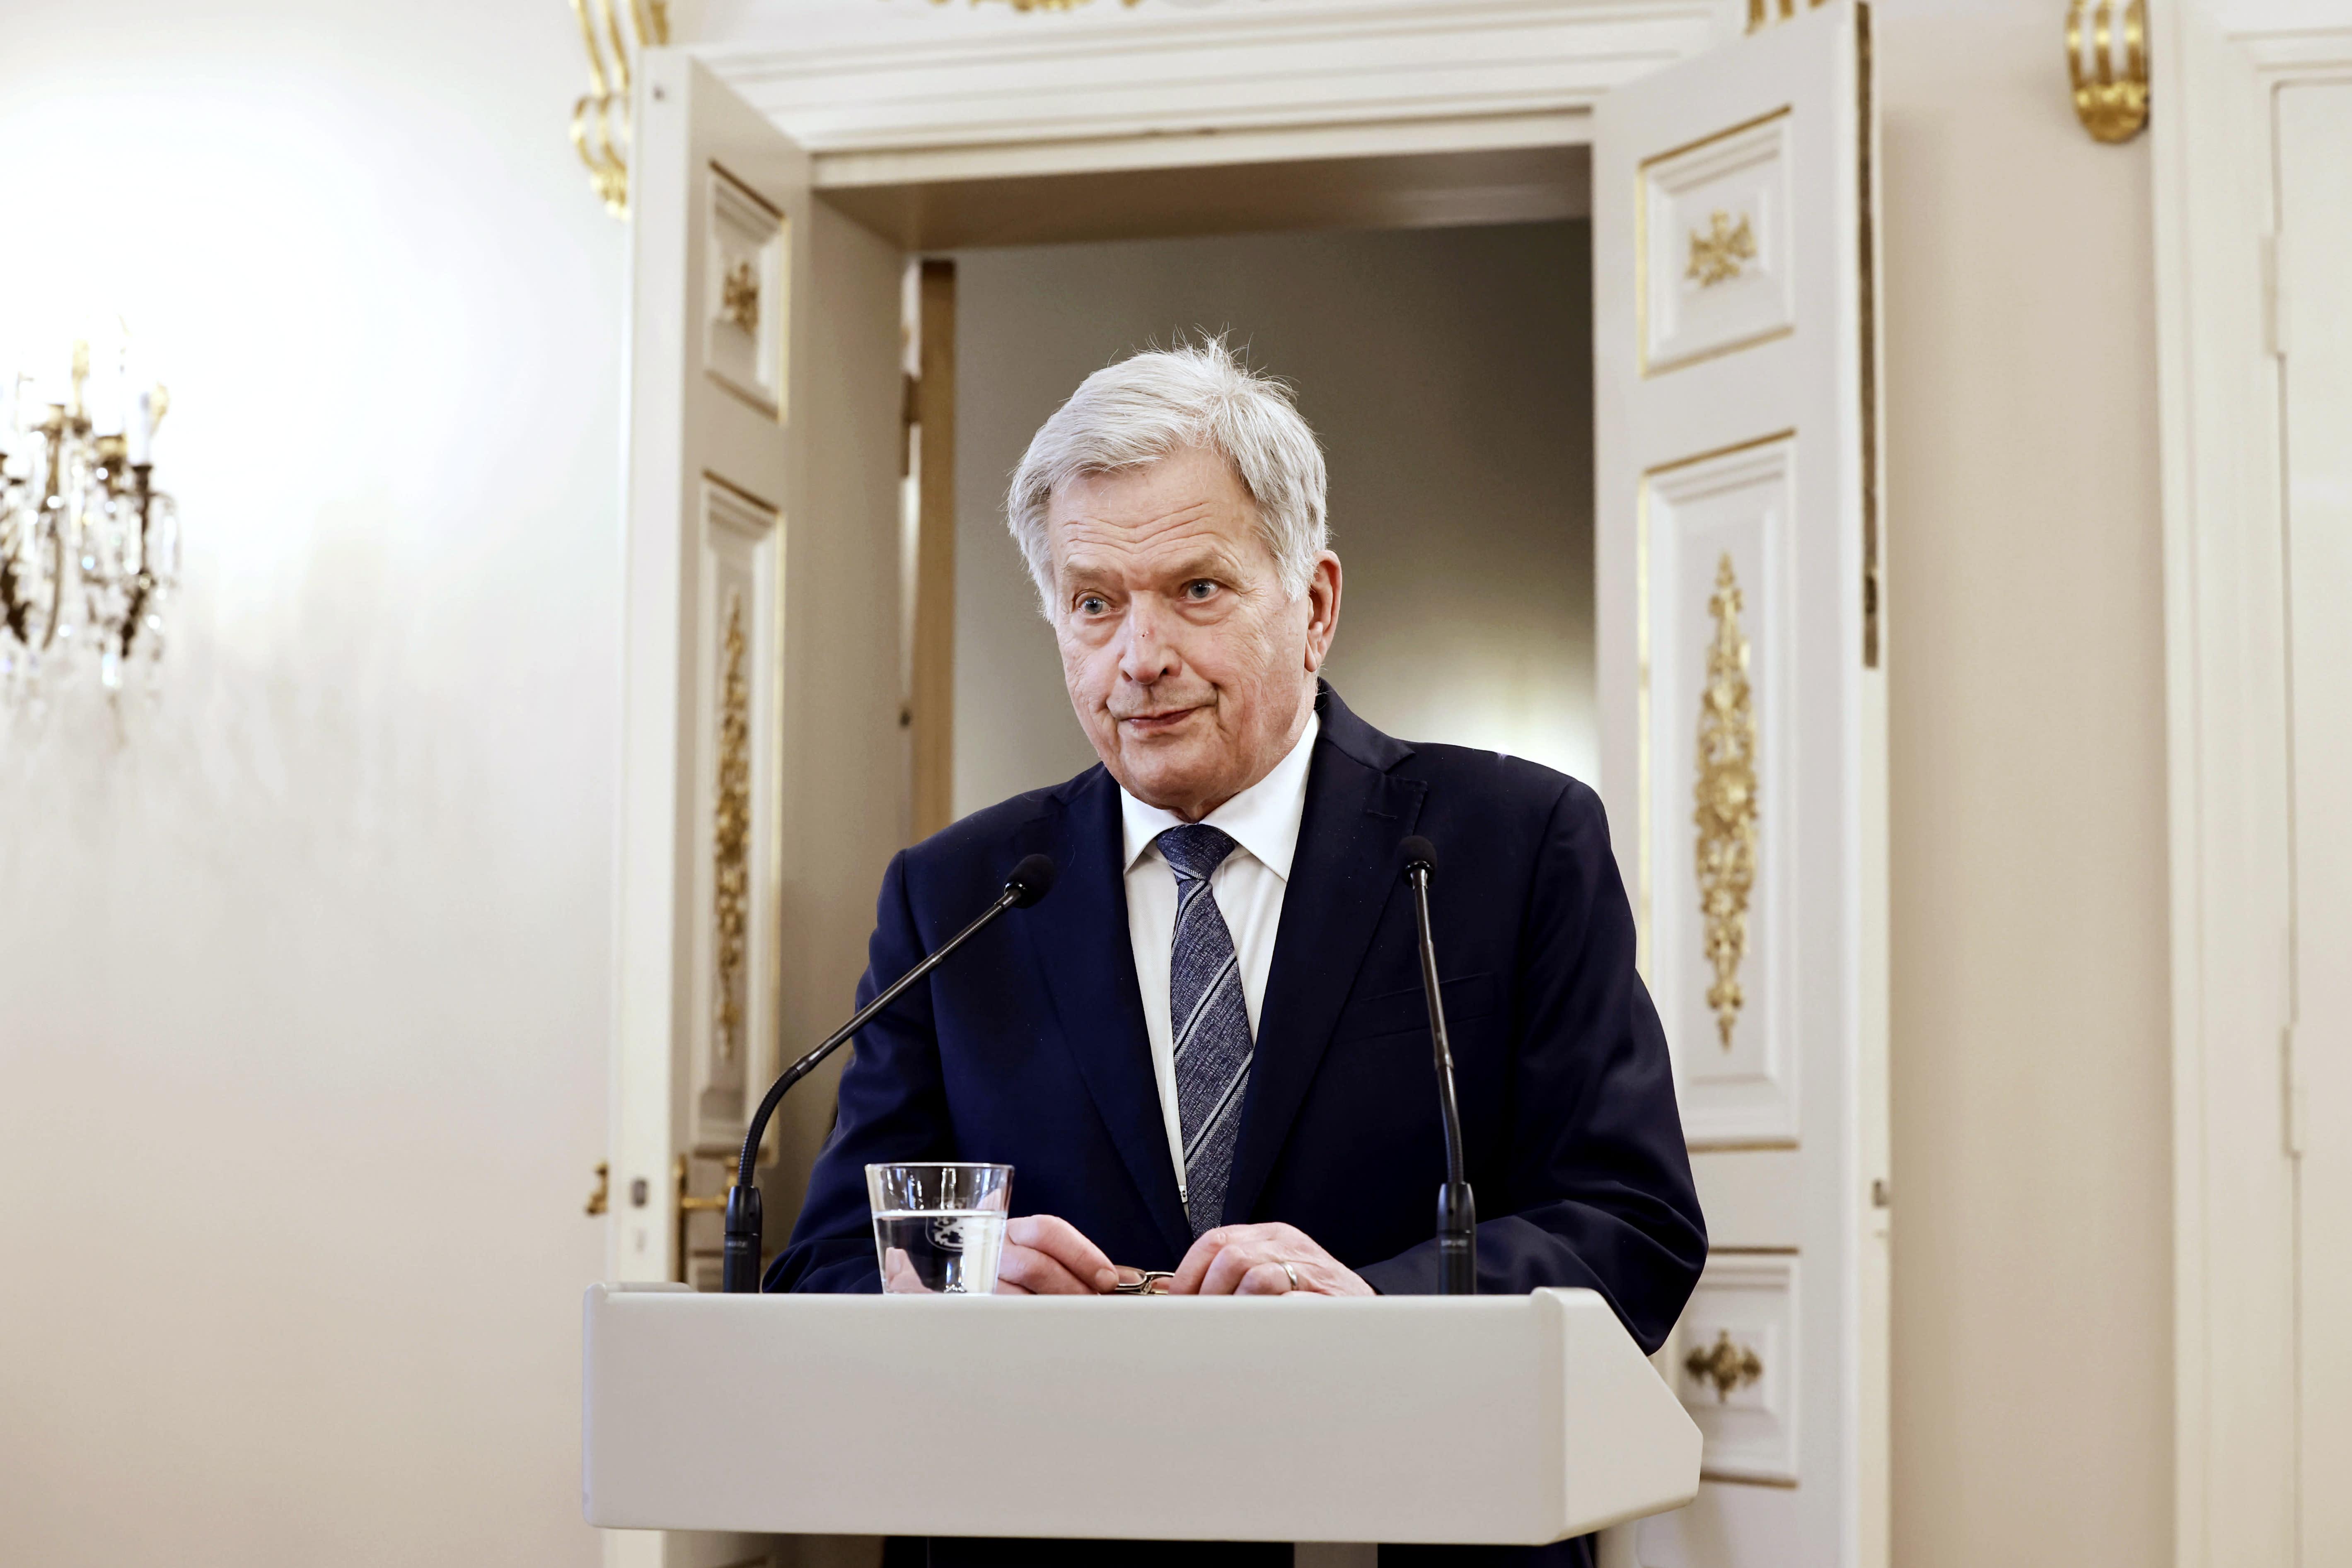 President Niinistö ends his 12-year term with the last press conference as Finland's head of state